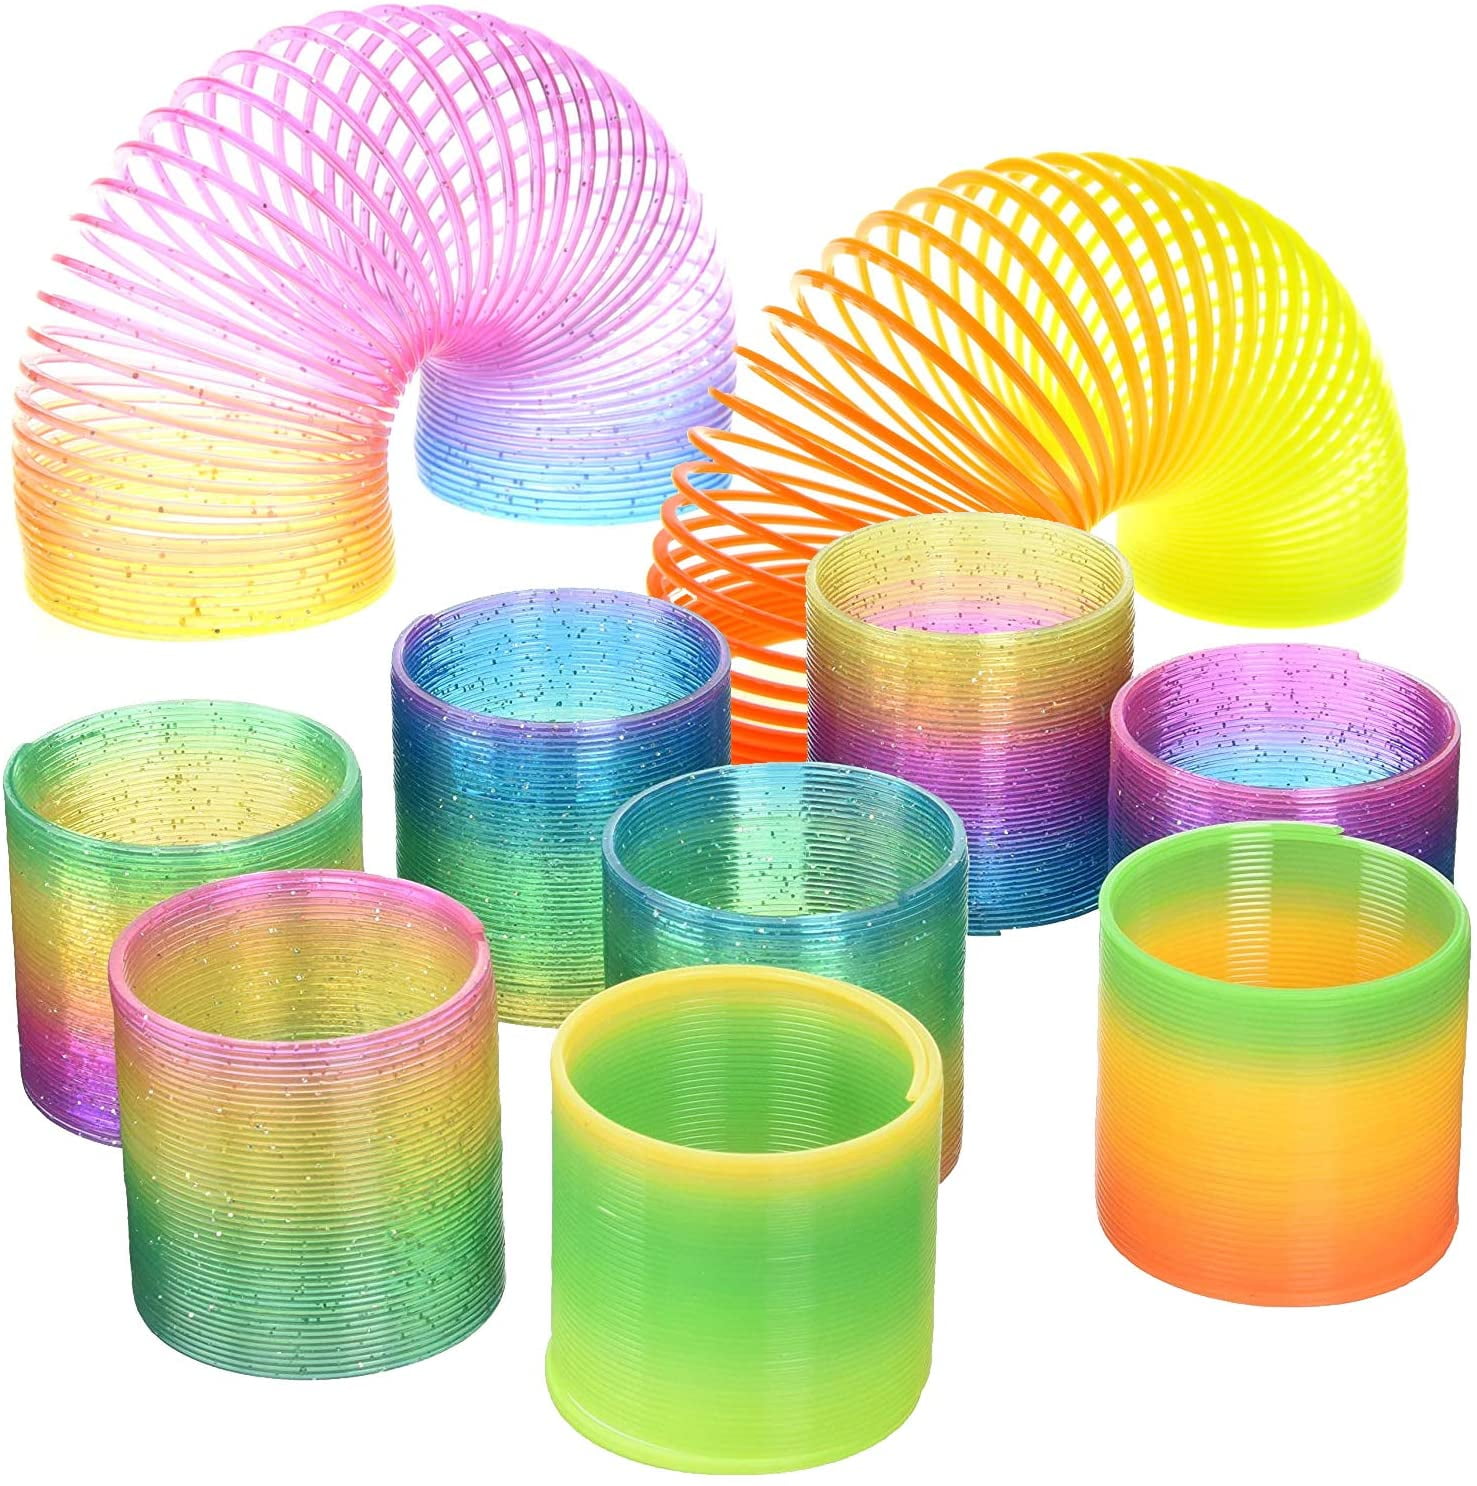 Details about   2 x METAL SPRING SLINKY RAINBOW CIRCLE CLASSIC NOVELTY TOY KIDS RETRO GAME 60mm 